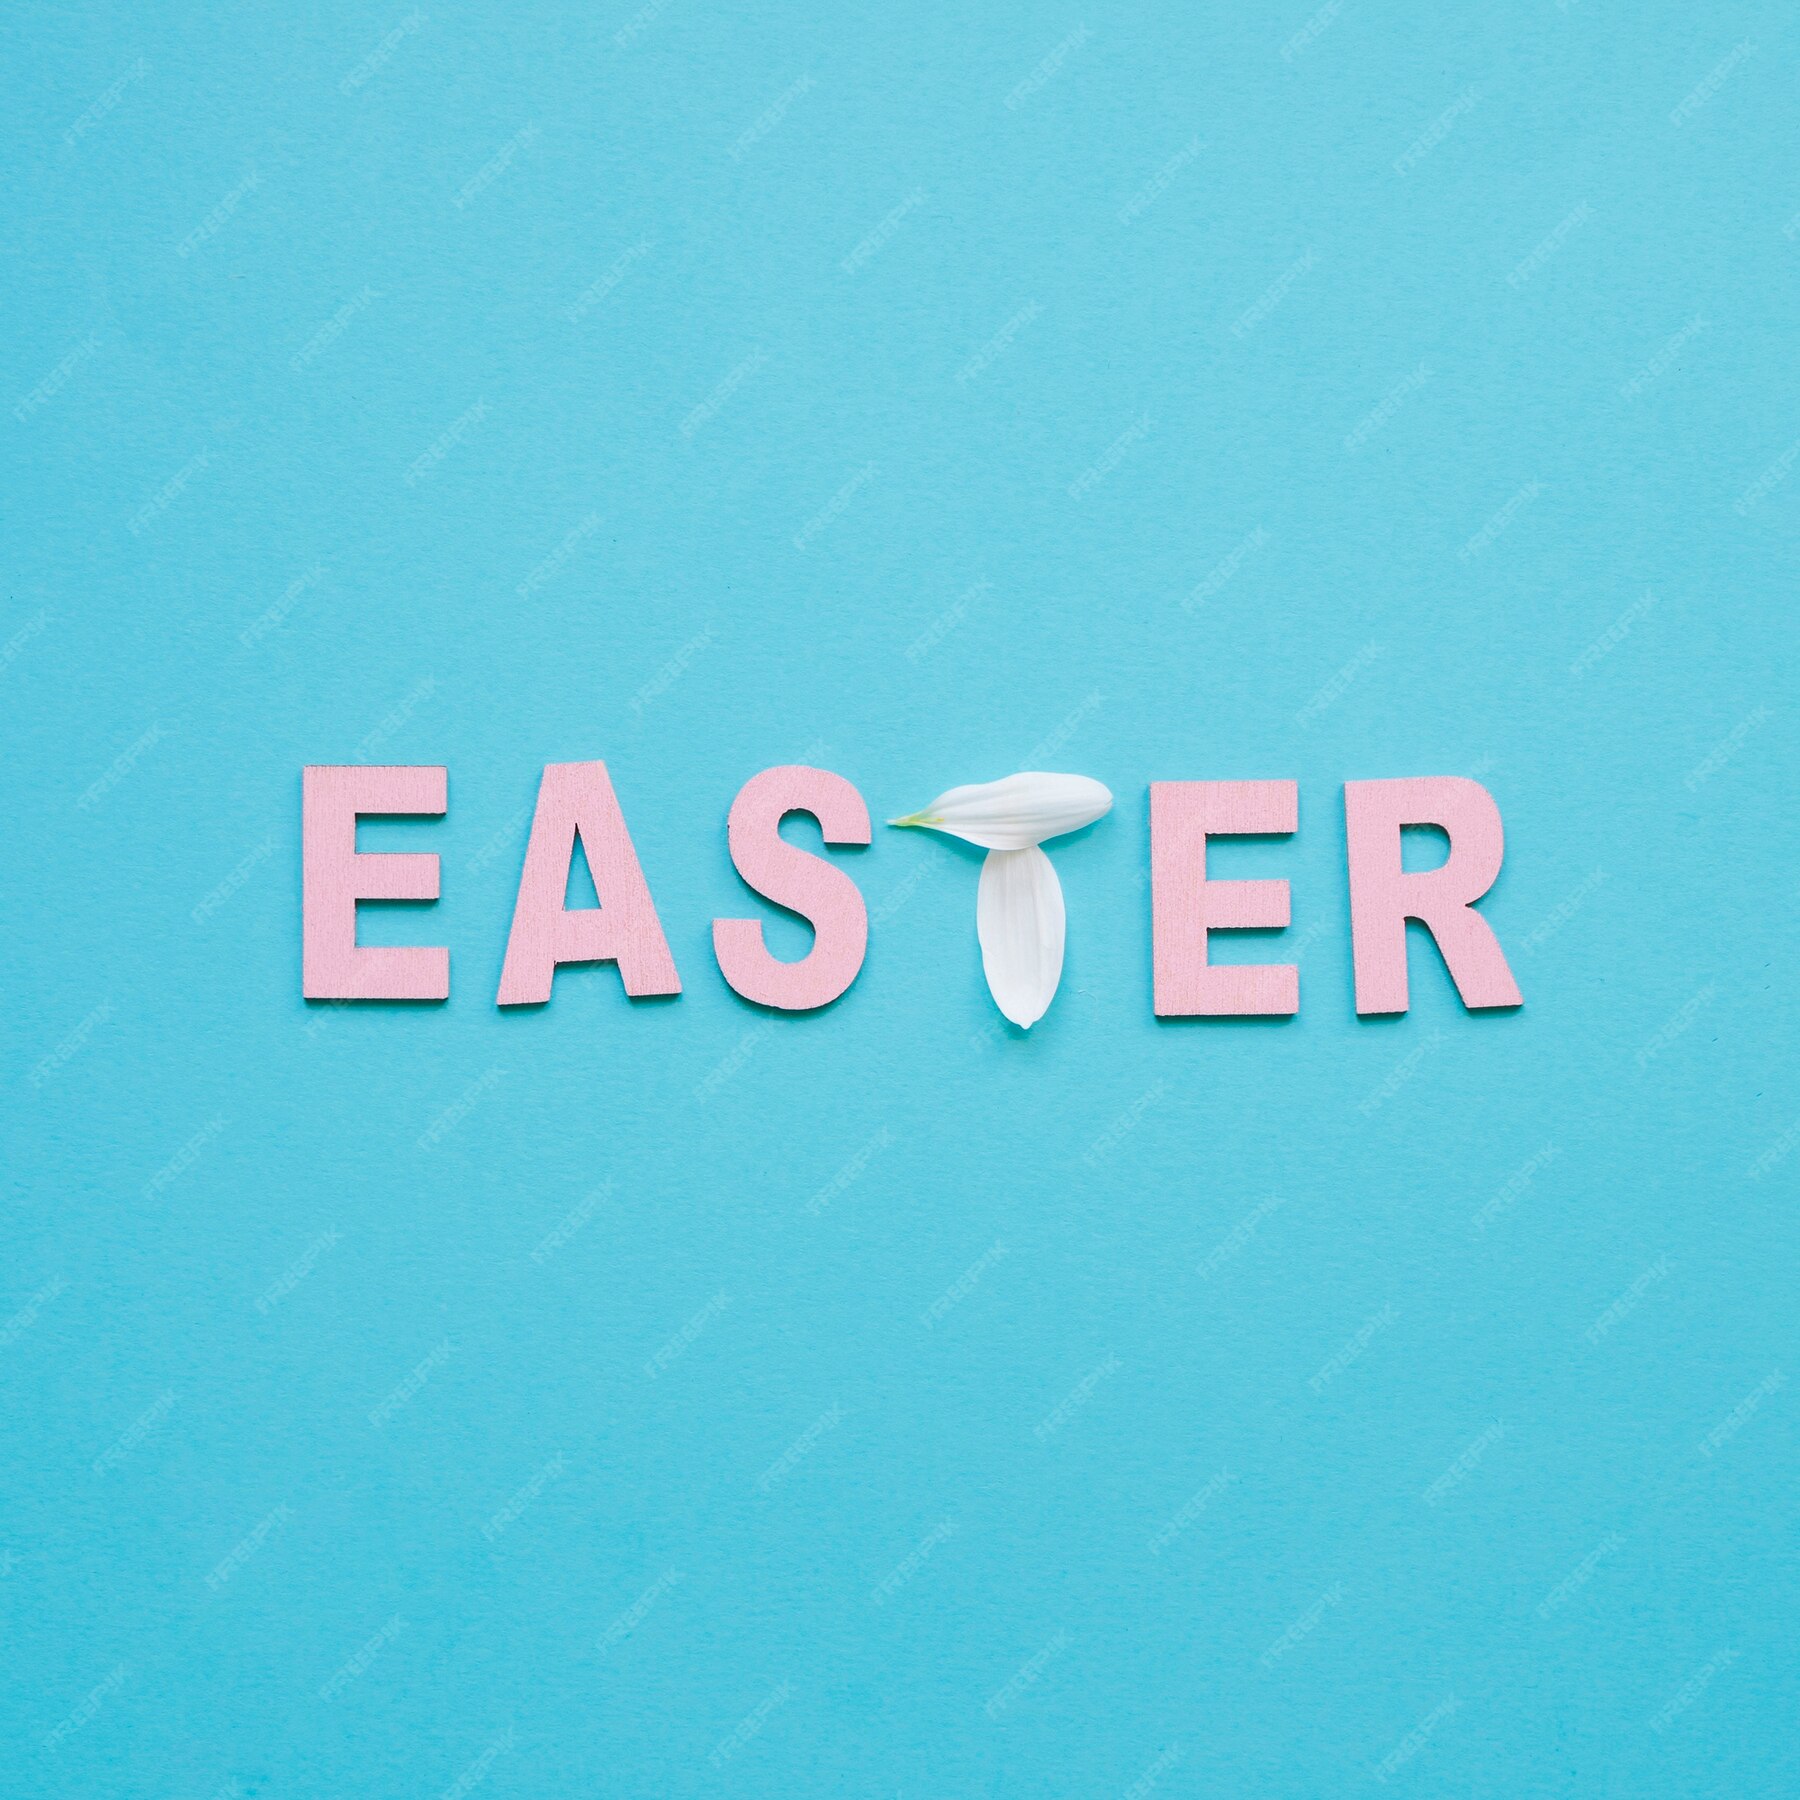 free-photo-easter-word-made-with-petals